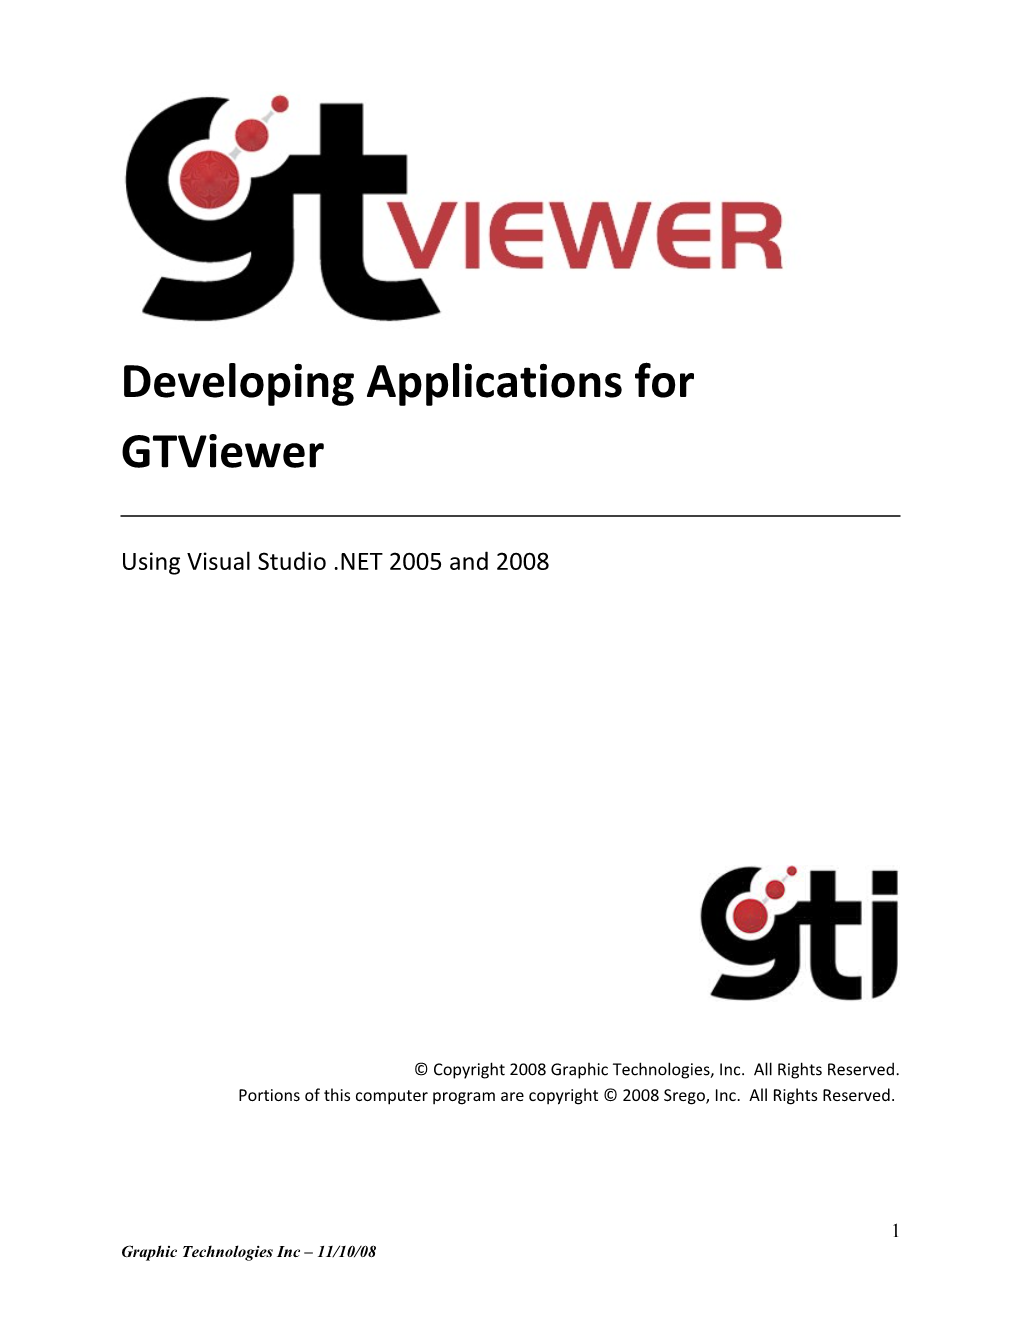 Developing Applications for Gtviewer